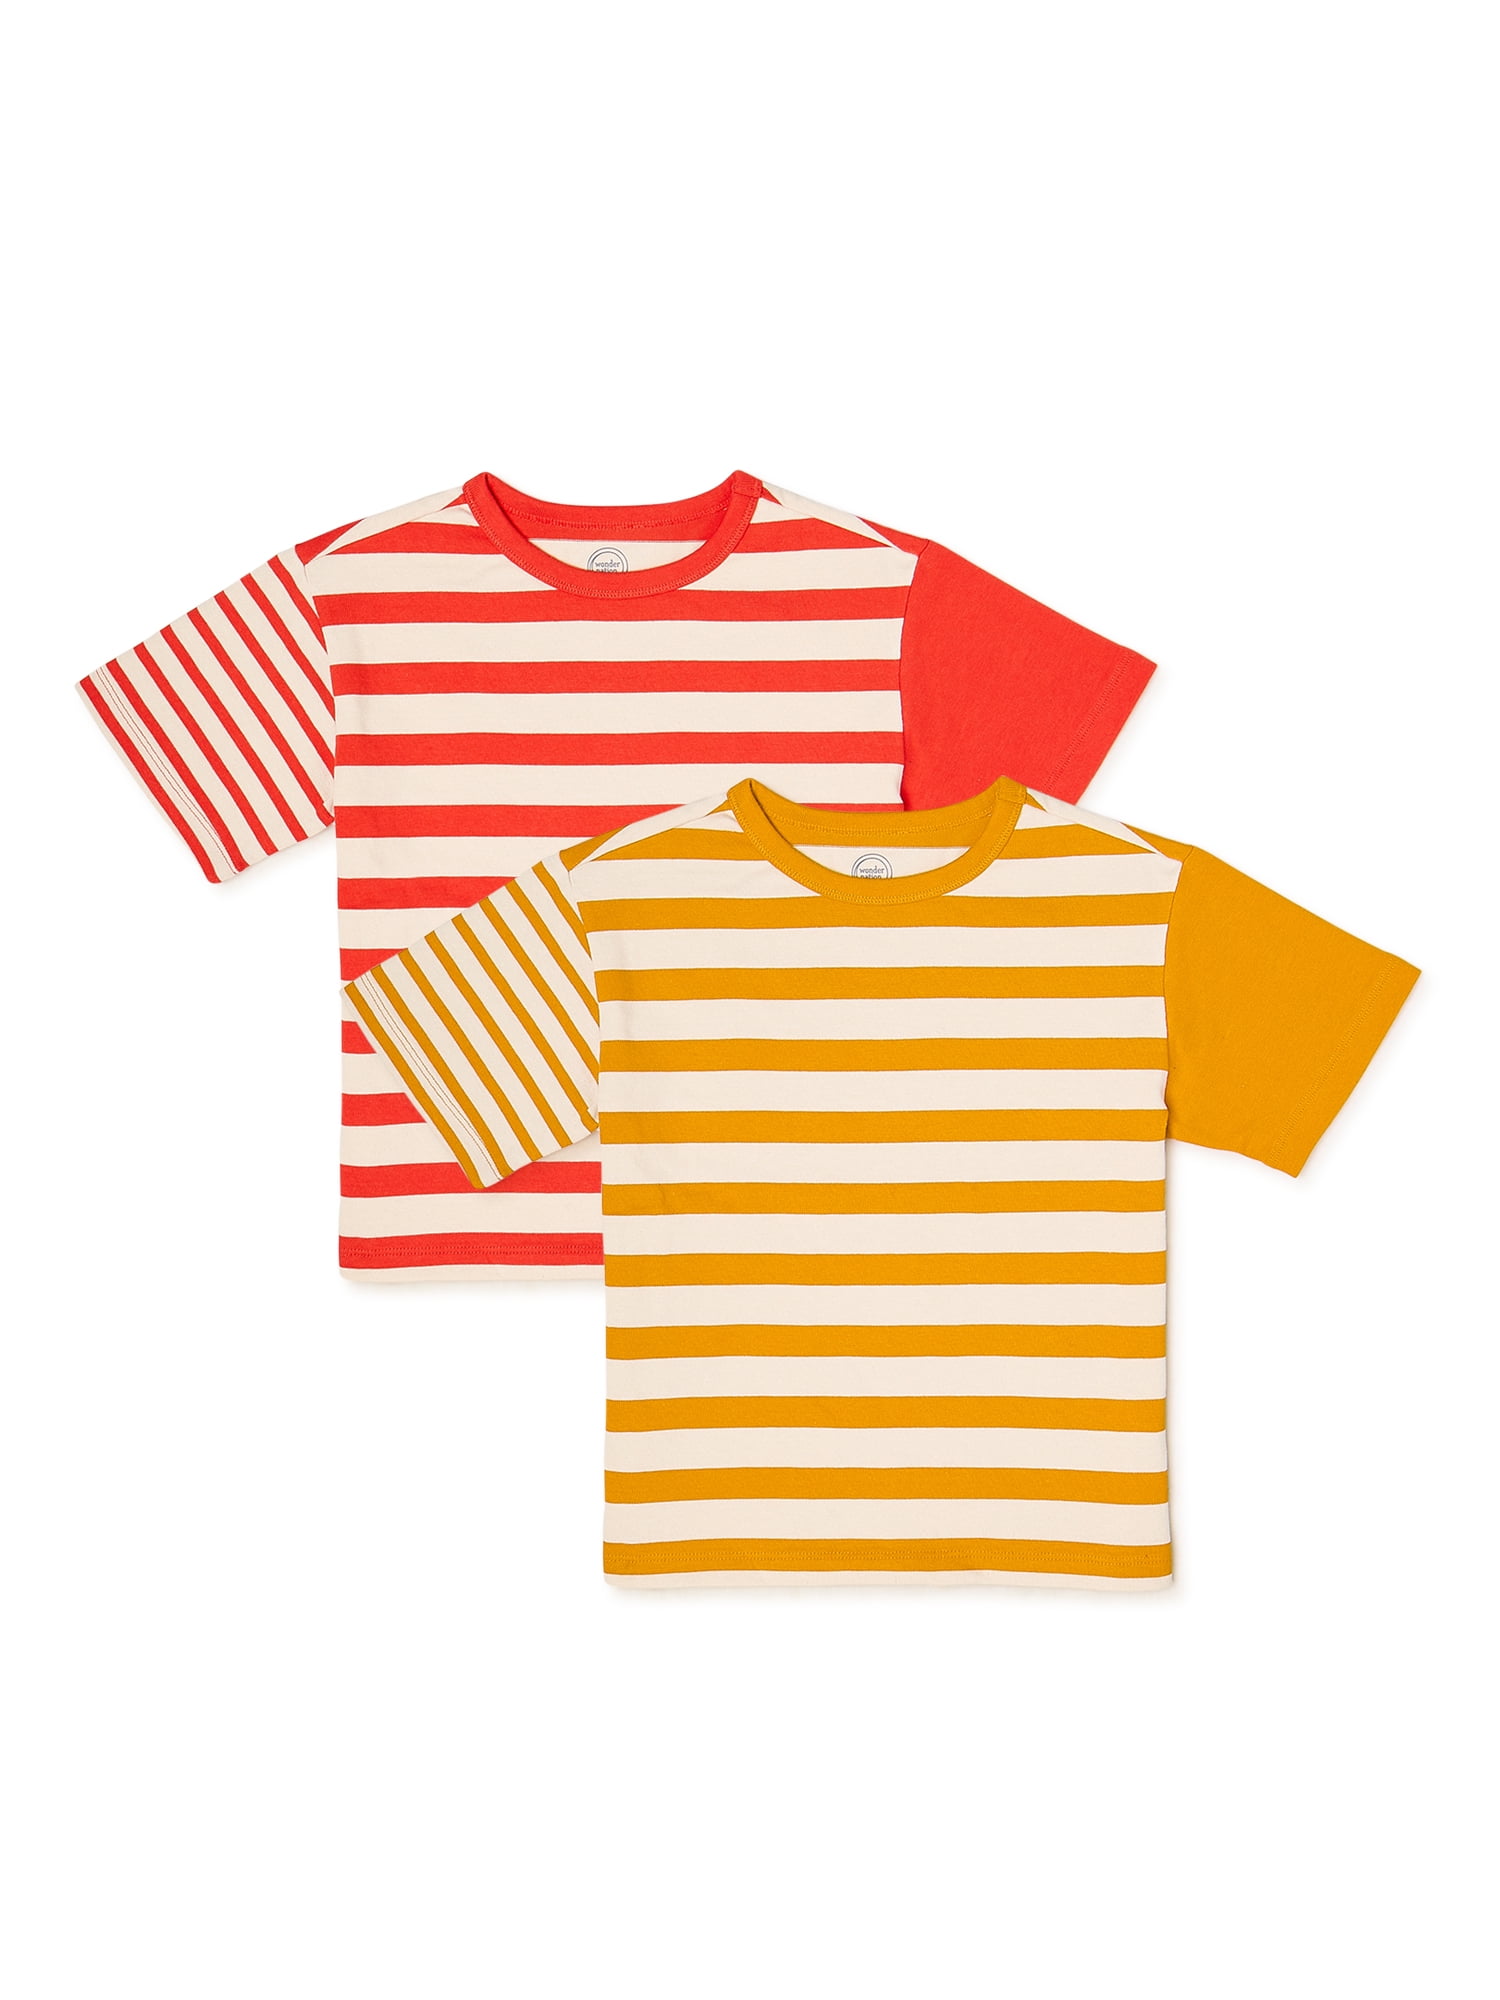 ExN*xt N*xt N-xt Kids Long Sleeve Top Red & Black and White striped 2 PACK IN 1 